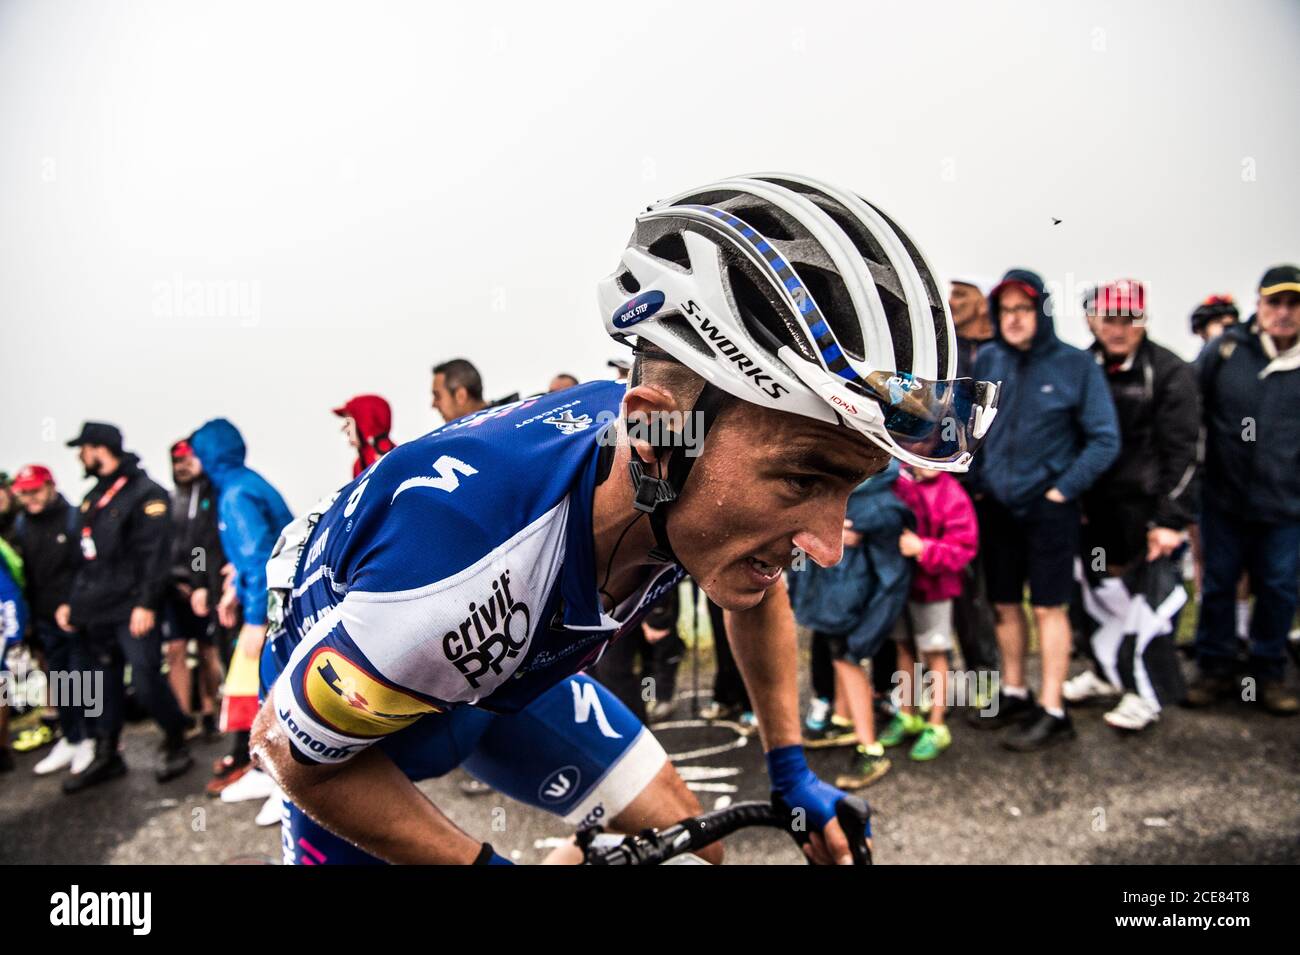 September 6th 2017, Los Machucos, Spain; Cycling, Vuelta a Espana Stage 17; Julian Alaphilippe. Stock Photo